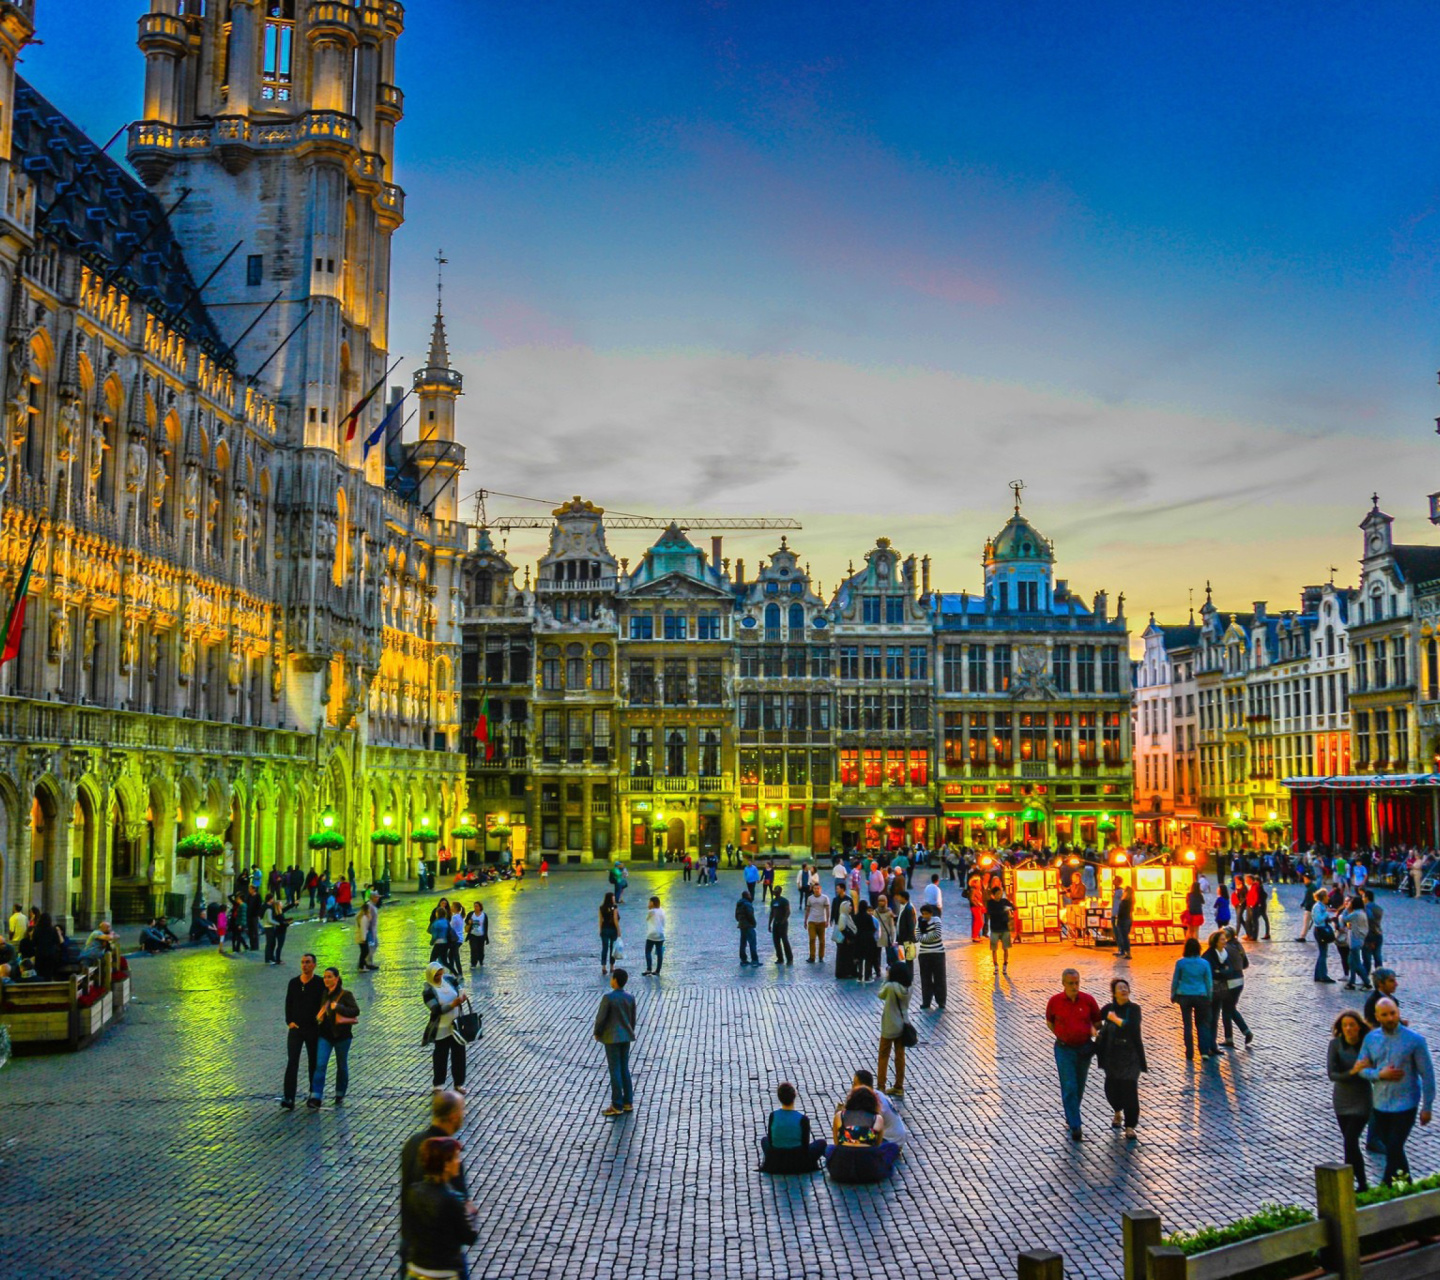 Grand place by night in Brussels screenshot #1 1440x1280